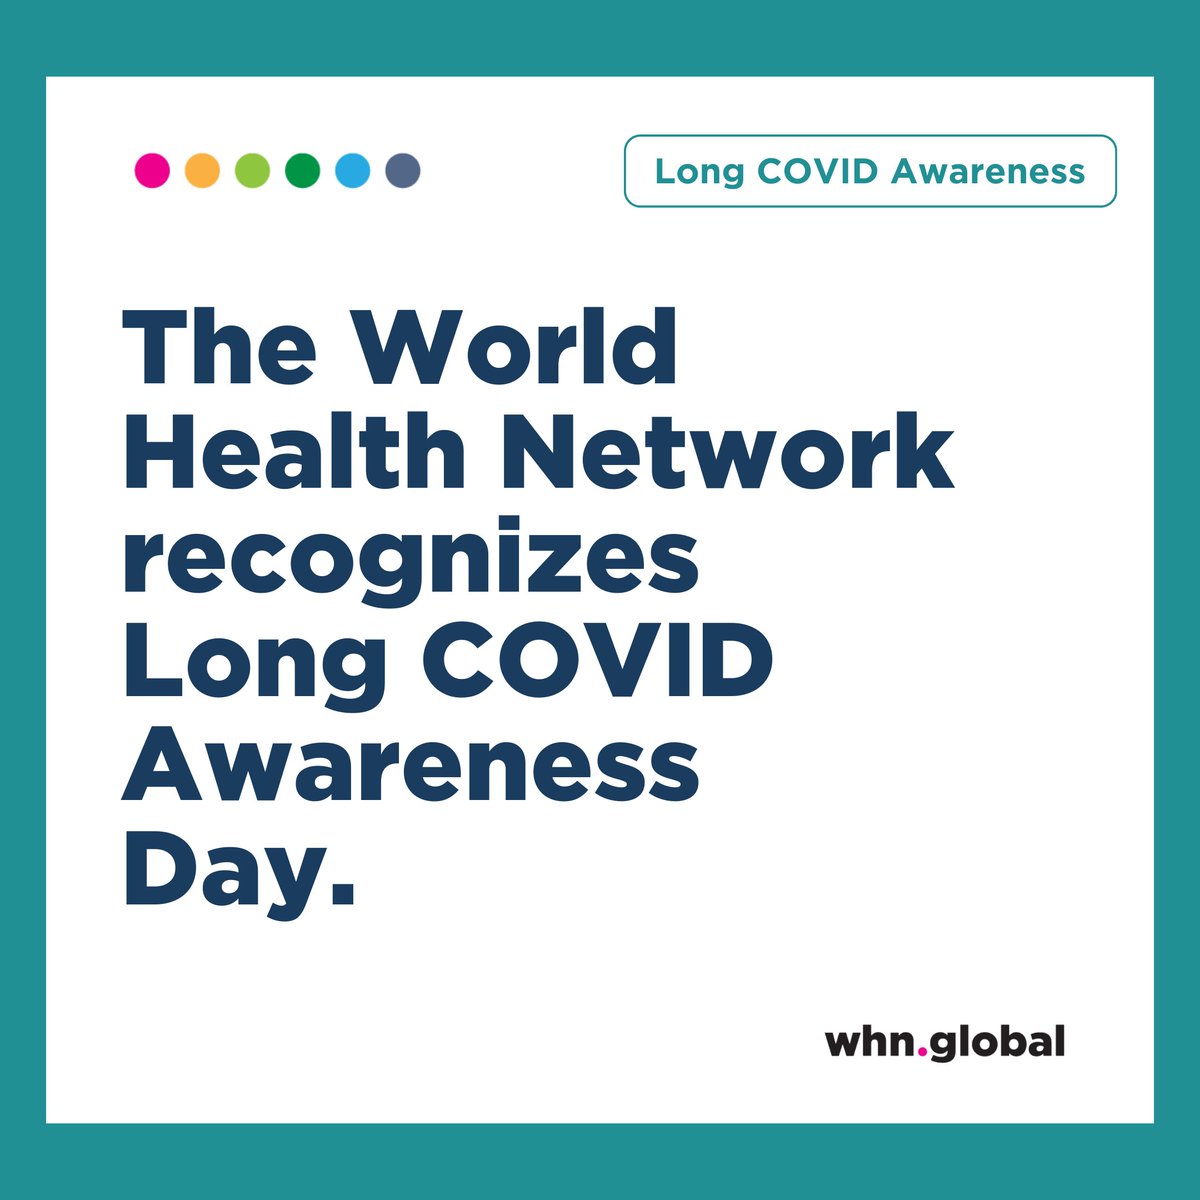 Today, on Long COVID Awareness Day, the World Health Network stands with those facing prolonged recovery, aiming to increase awareness and foster a supportive community. #LongCovid #Covid19 #Covid #HealthSafety #COVID19Precautions #StaySafeStayHealthy